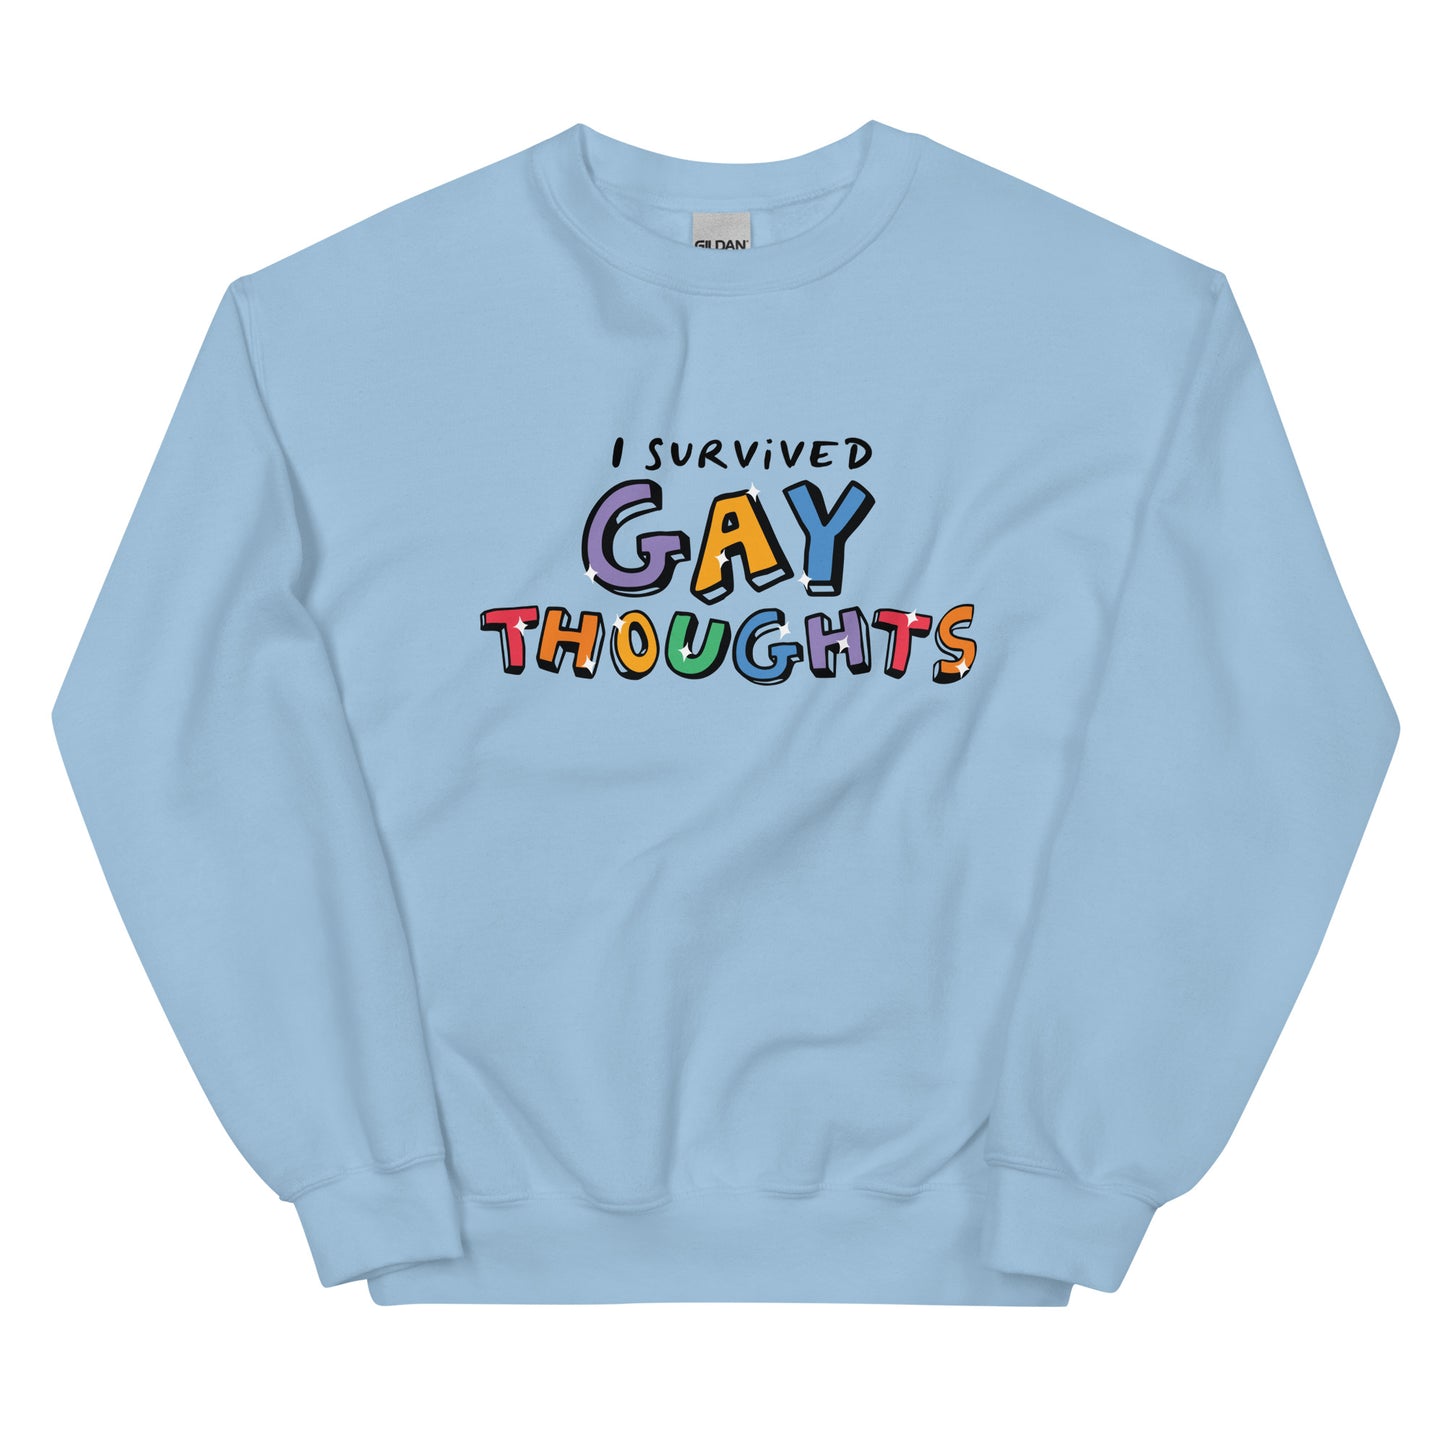 I Survived Gay Thoughts Unisex Sweatshirt